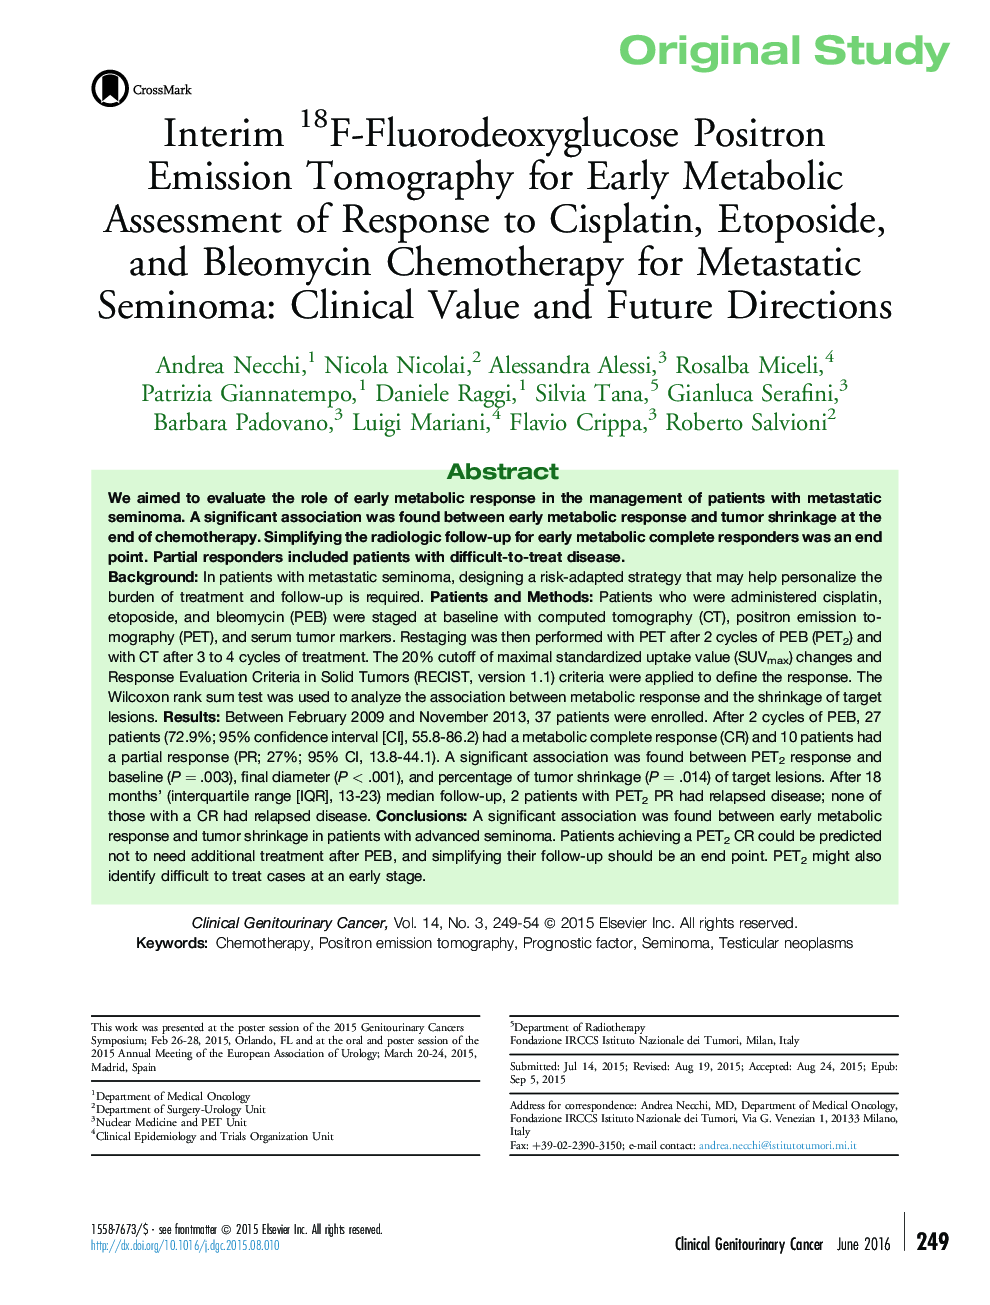 Interim 18F-Fluorodeoxyglucose Positron Emission Tomography for Early Metabolic Assessment of Response to Cisplatin, Etoposide, and Bleomycin Chemotherapy for Metastatic Seminoma: Clinical Value and Future Directions